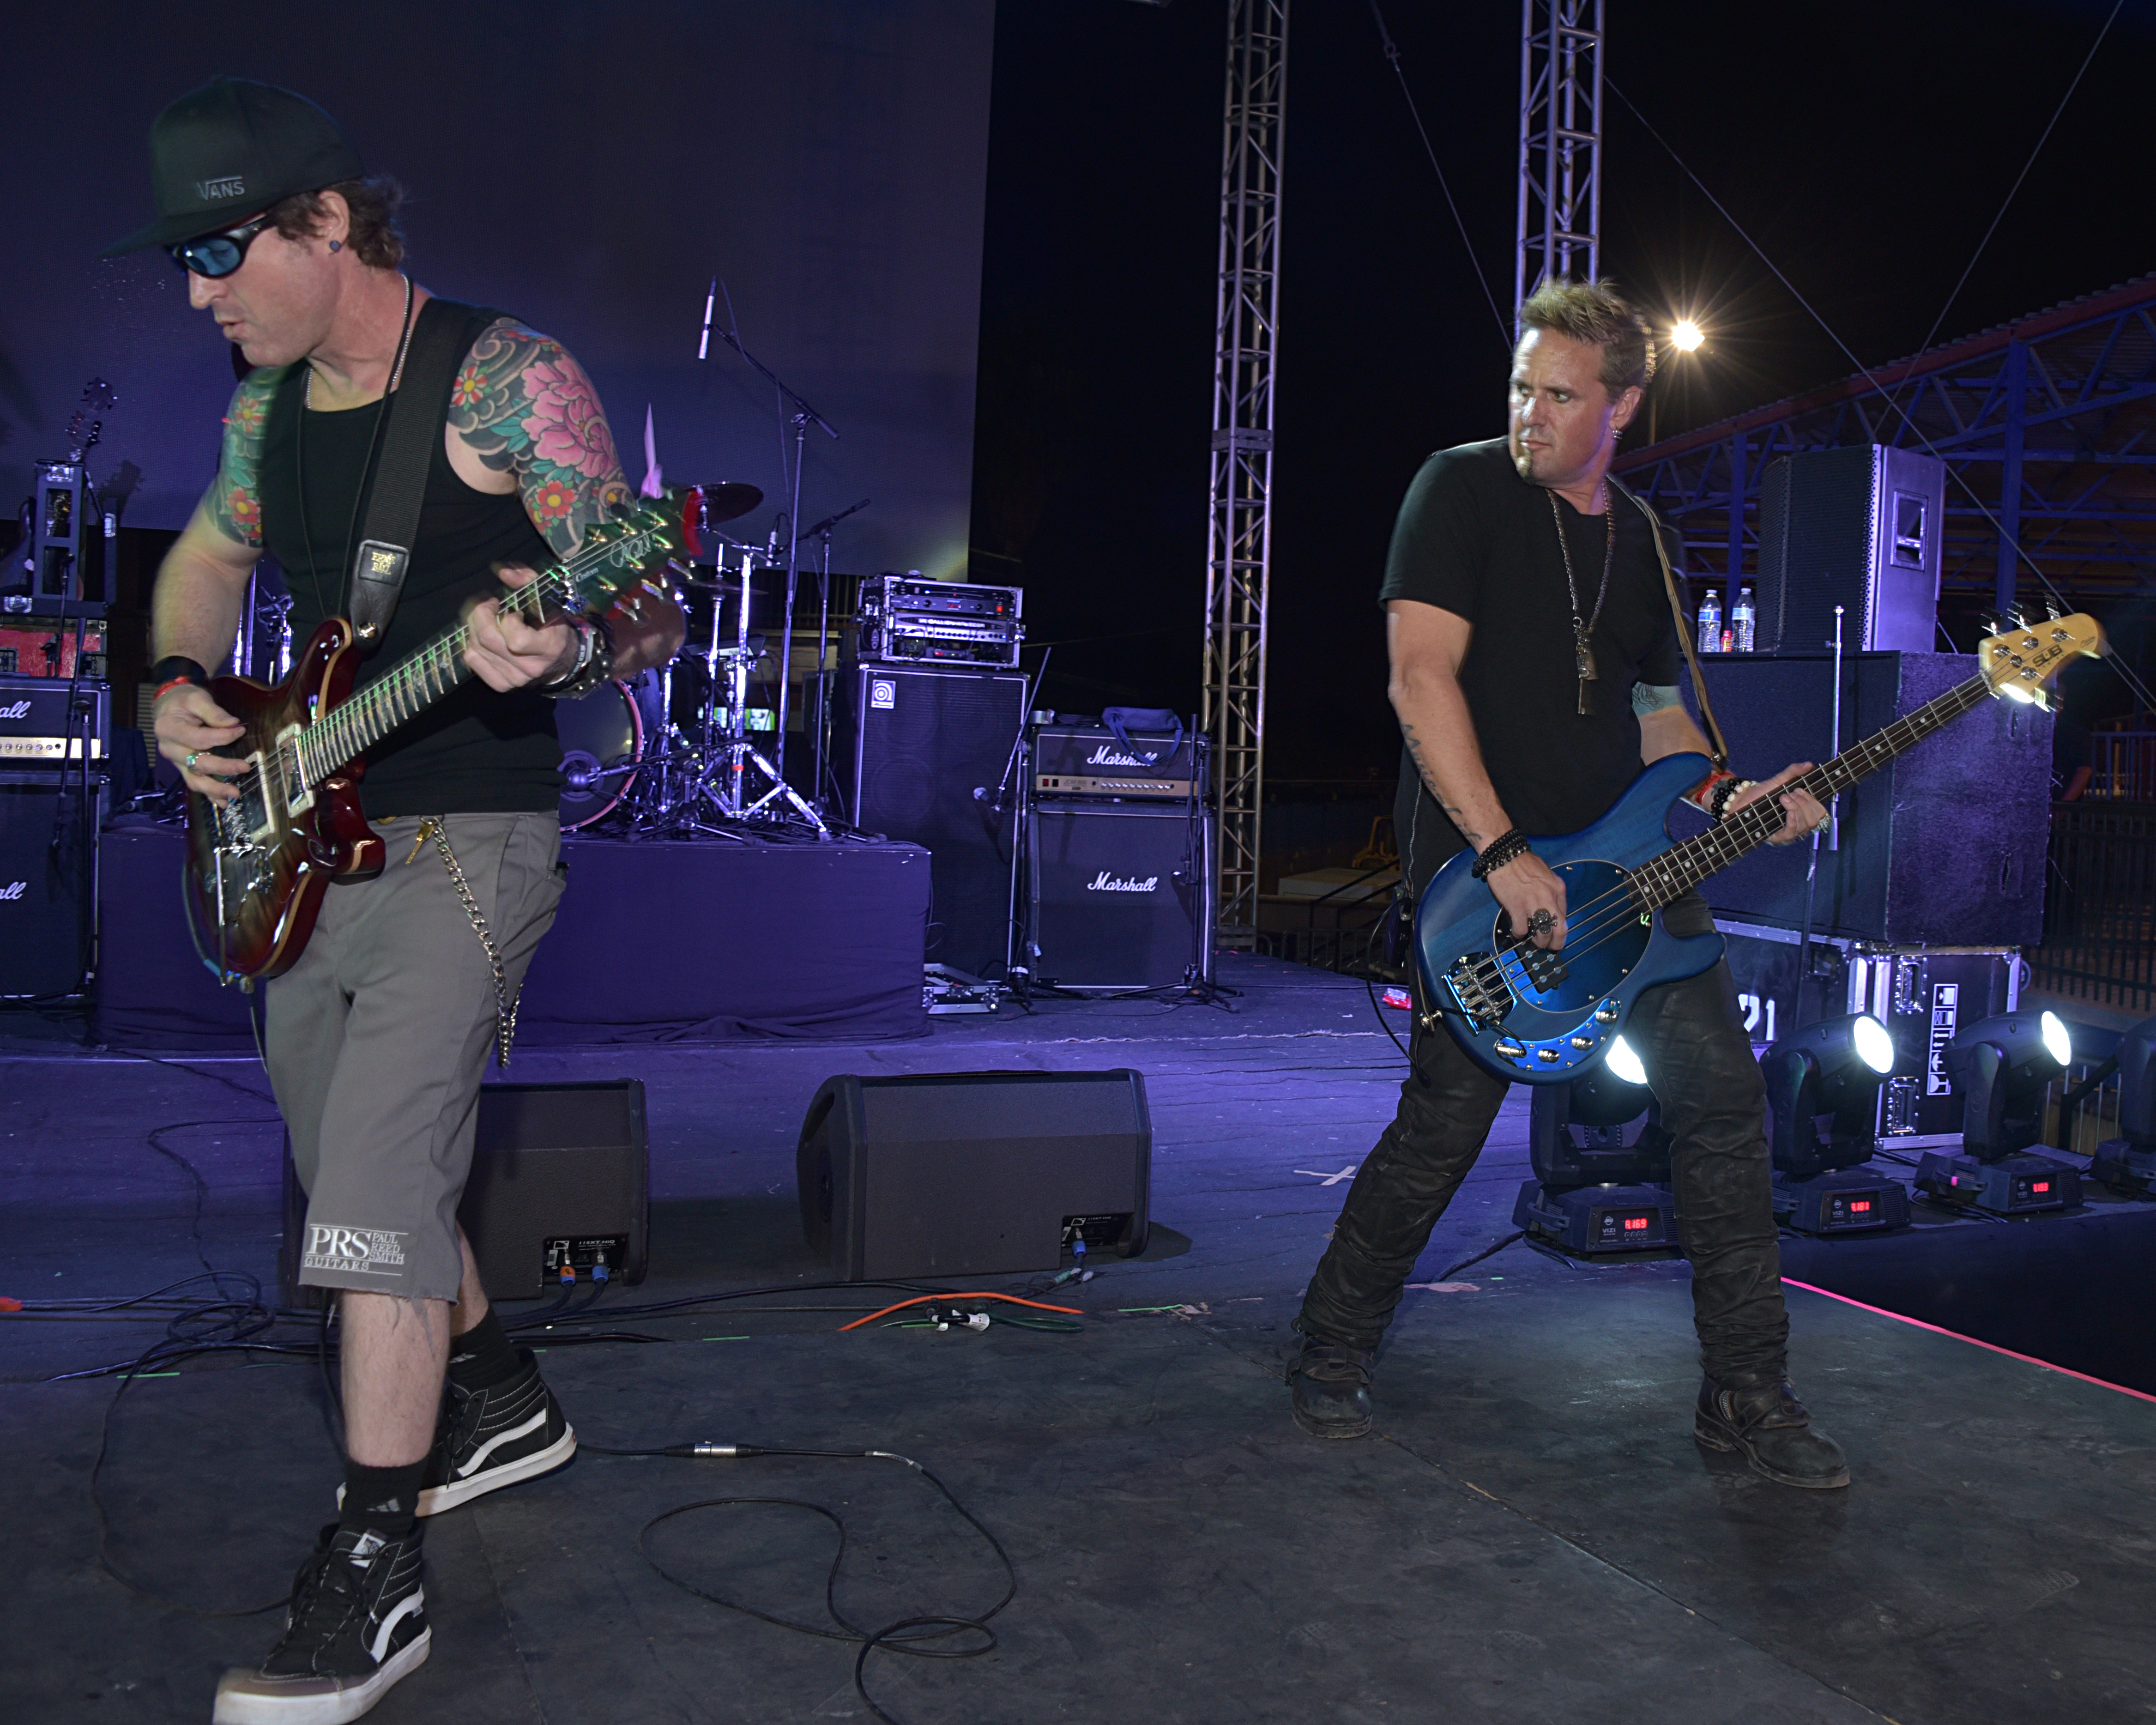 Never Your Zero Rock Band performing at the Indie Stock Music Festival 2017 at Pico Rivera Sports Arena